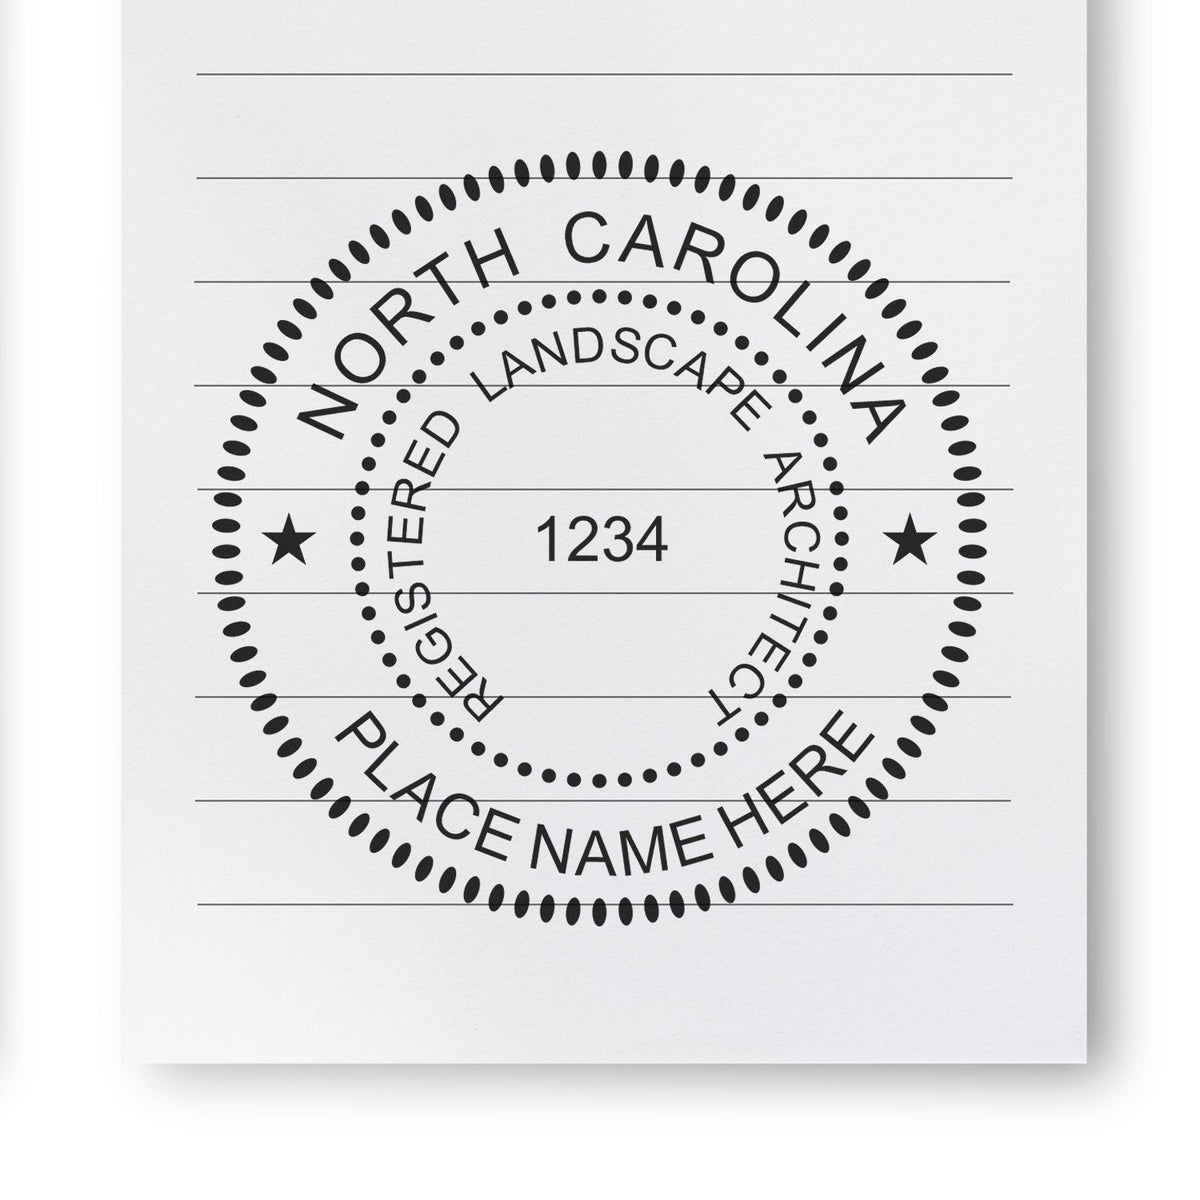 A lifestyle photo showing a stamped image of the Digital North Carolina Landscape Architect Stamp on a piece of paper